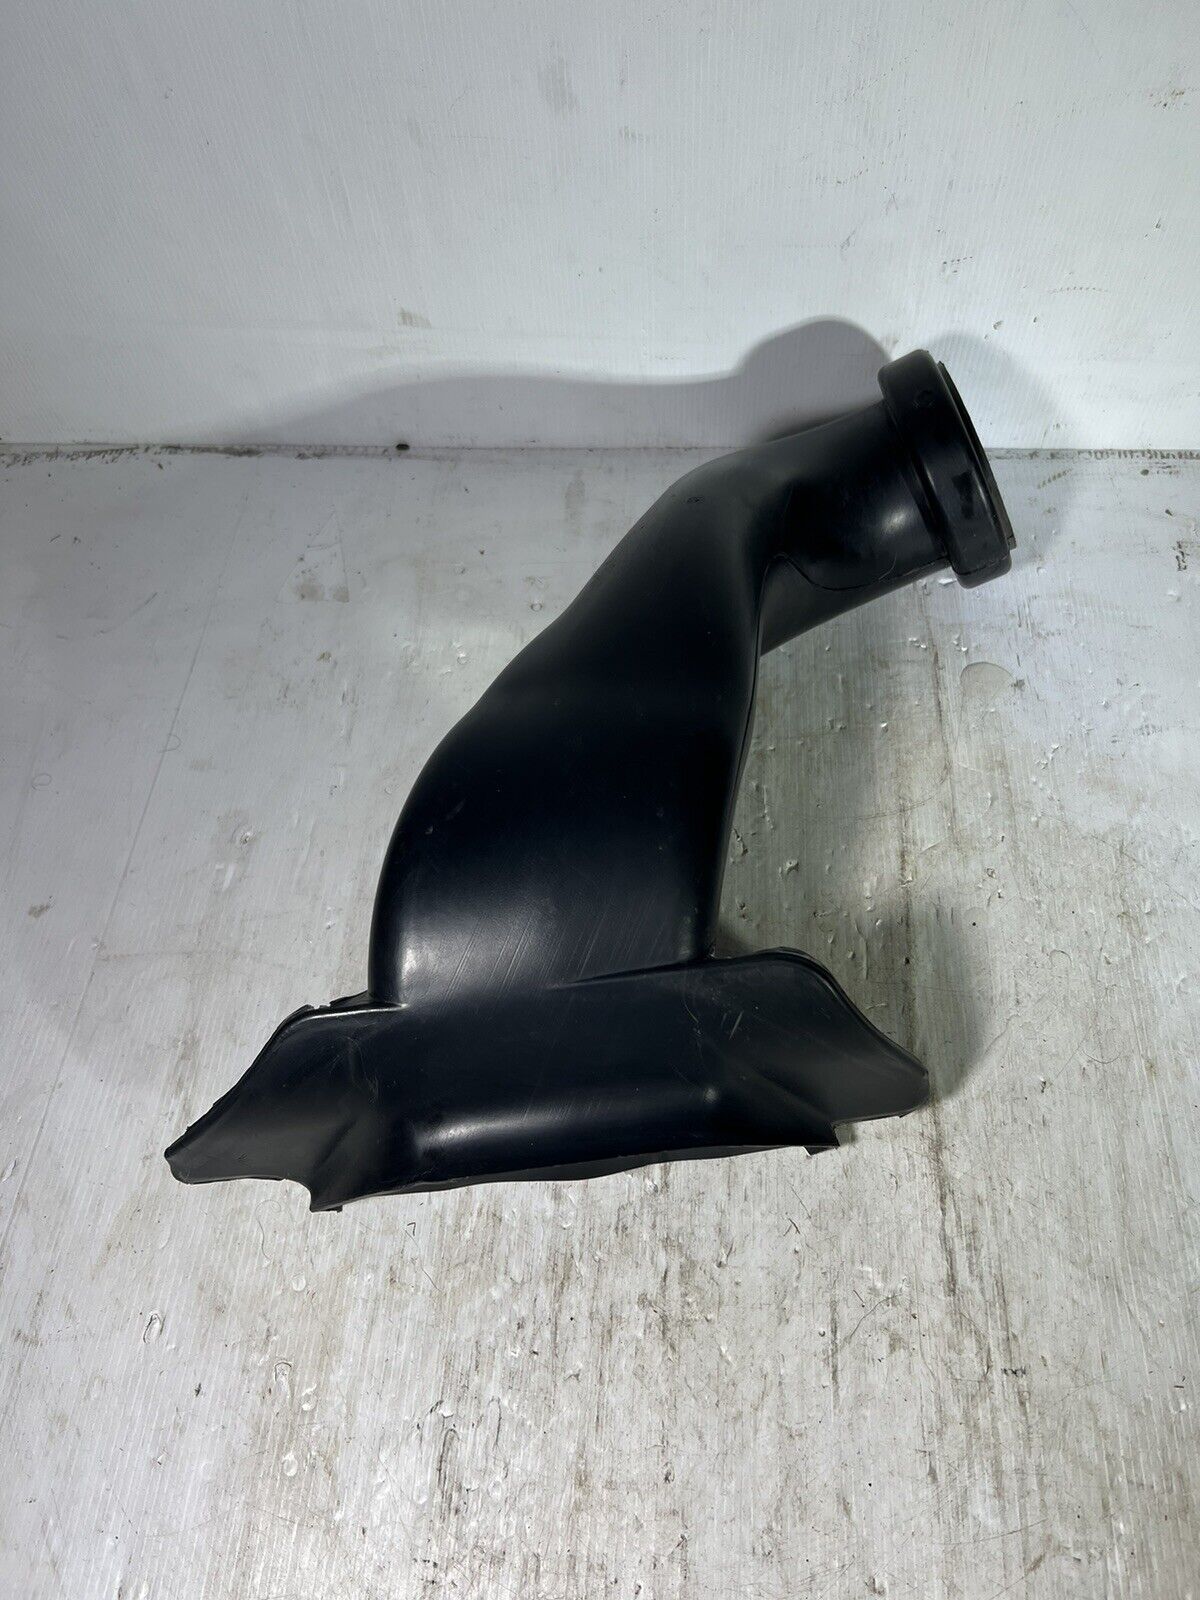 FORD FALCON BA BF TERRITORY SX SY AIR INTAKE PIPE SNORKEL 6 CYLINDER PETROL LPG